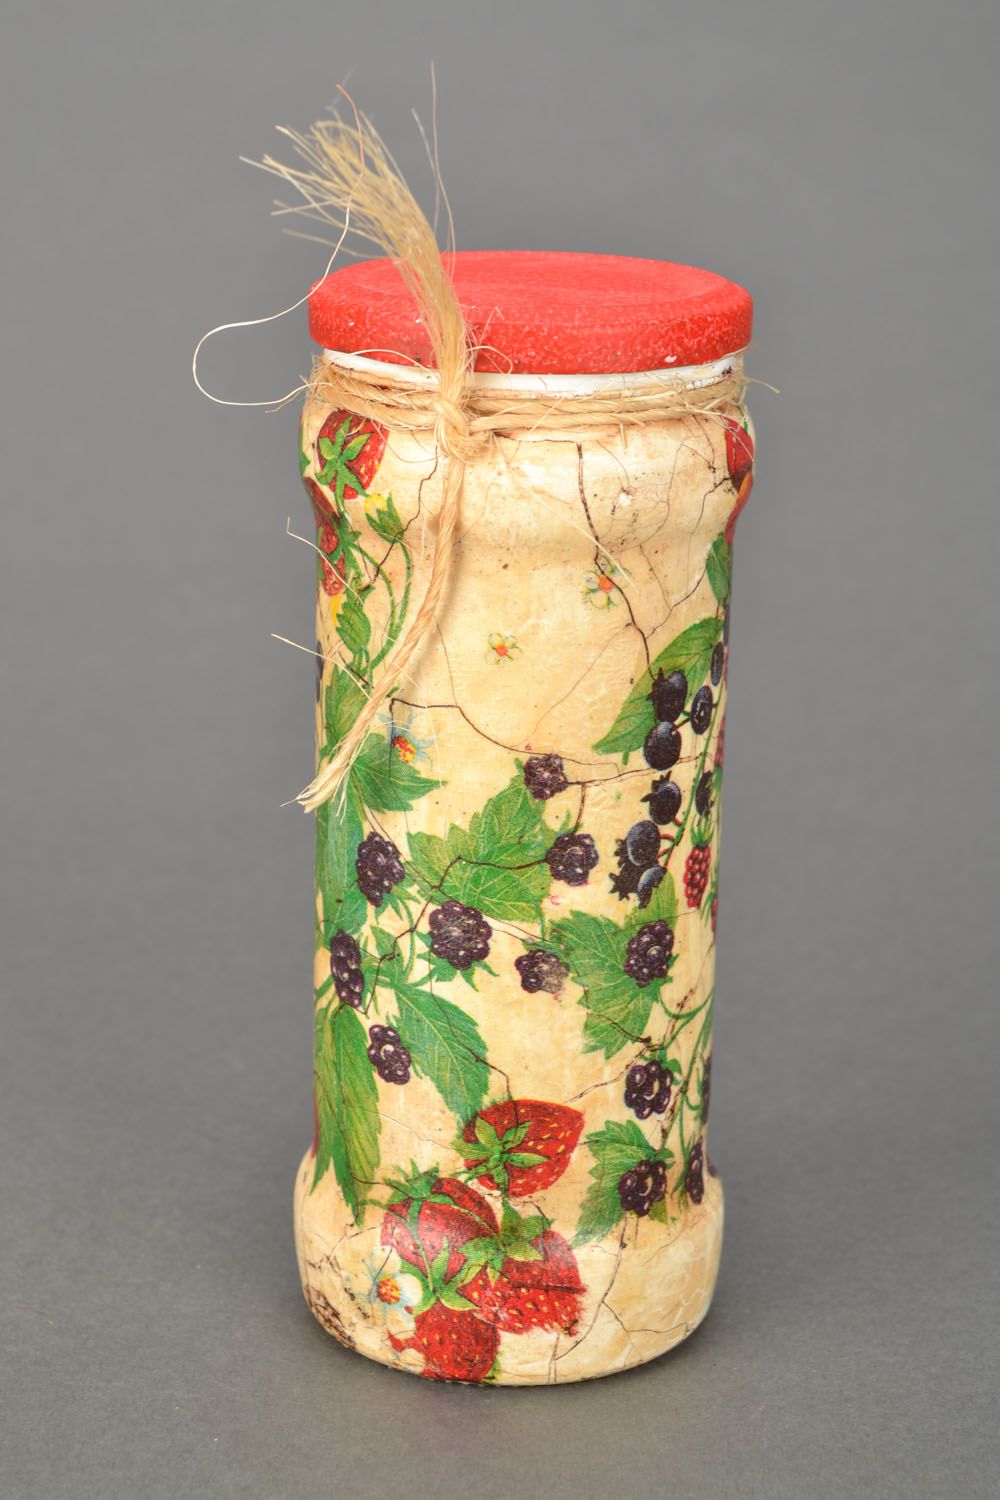 8 oz decorative shape tube jar in yellow color with red lid 0,8 lb photo 1